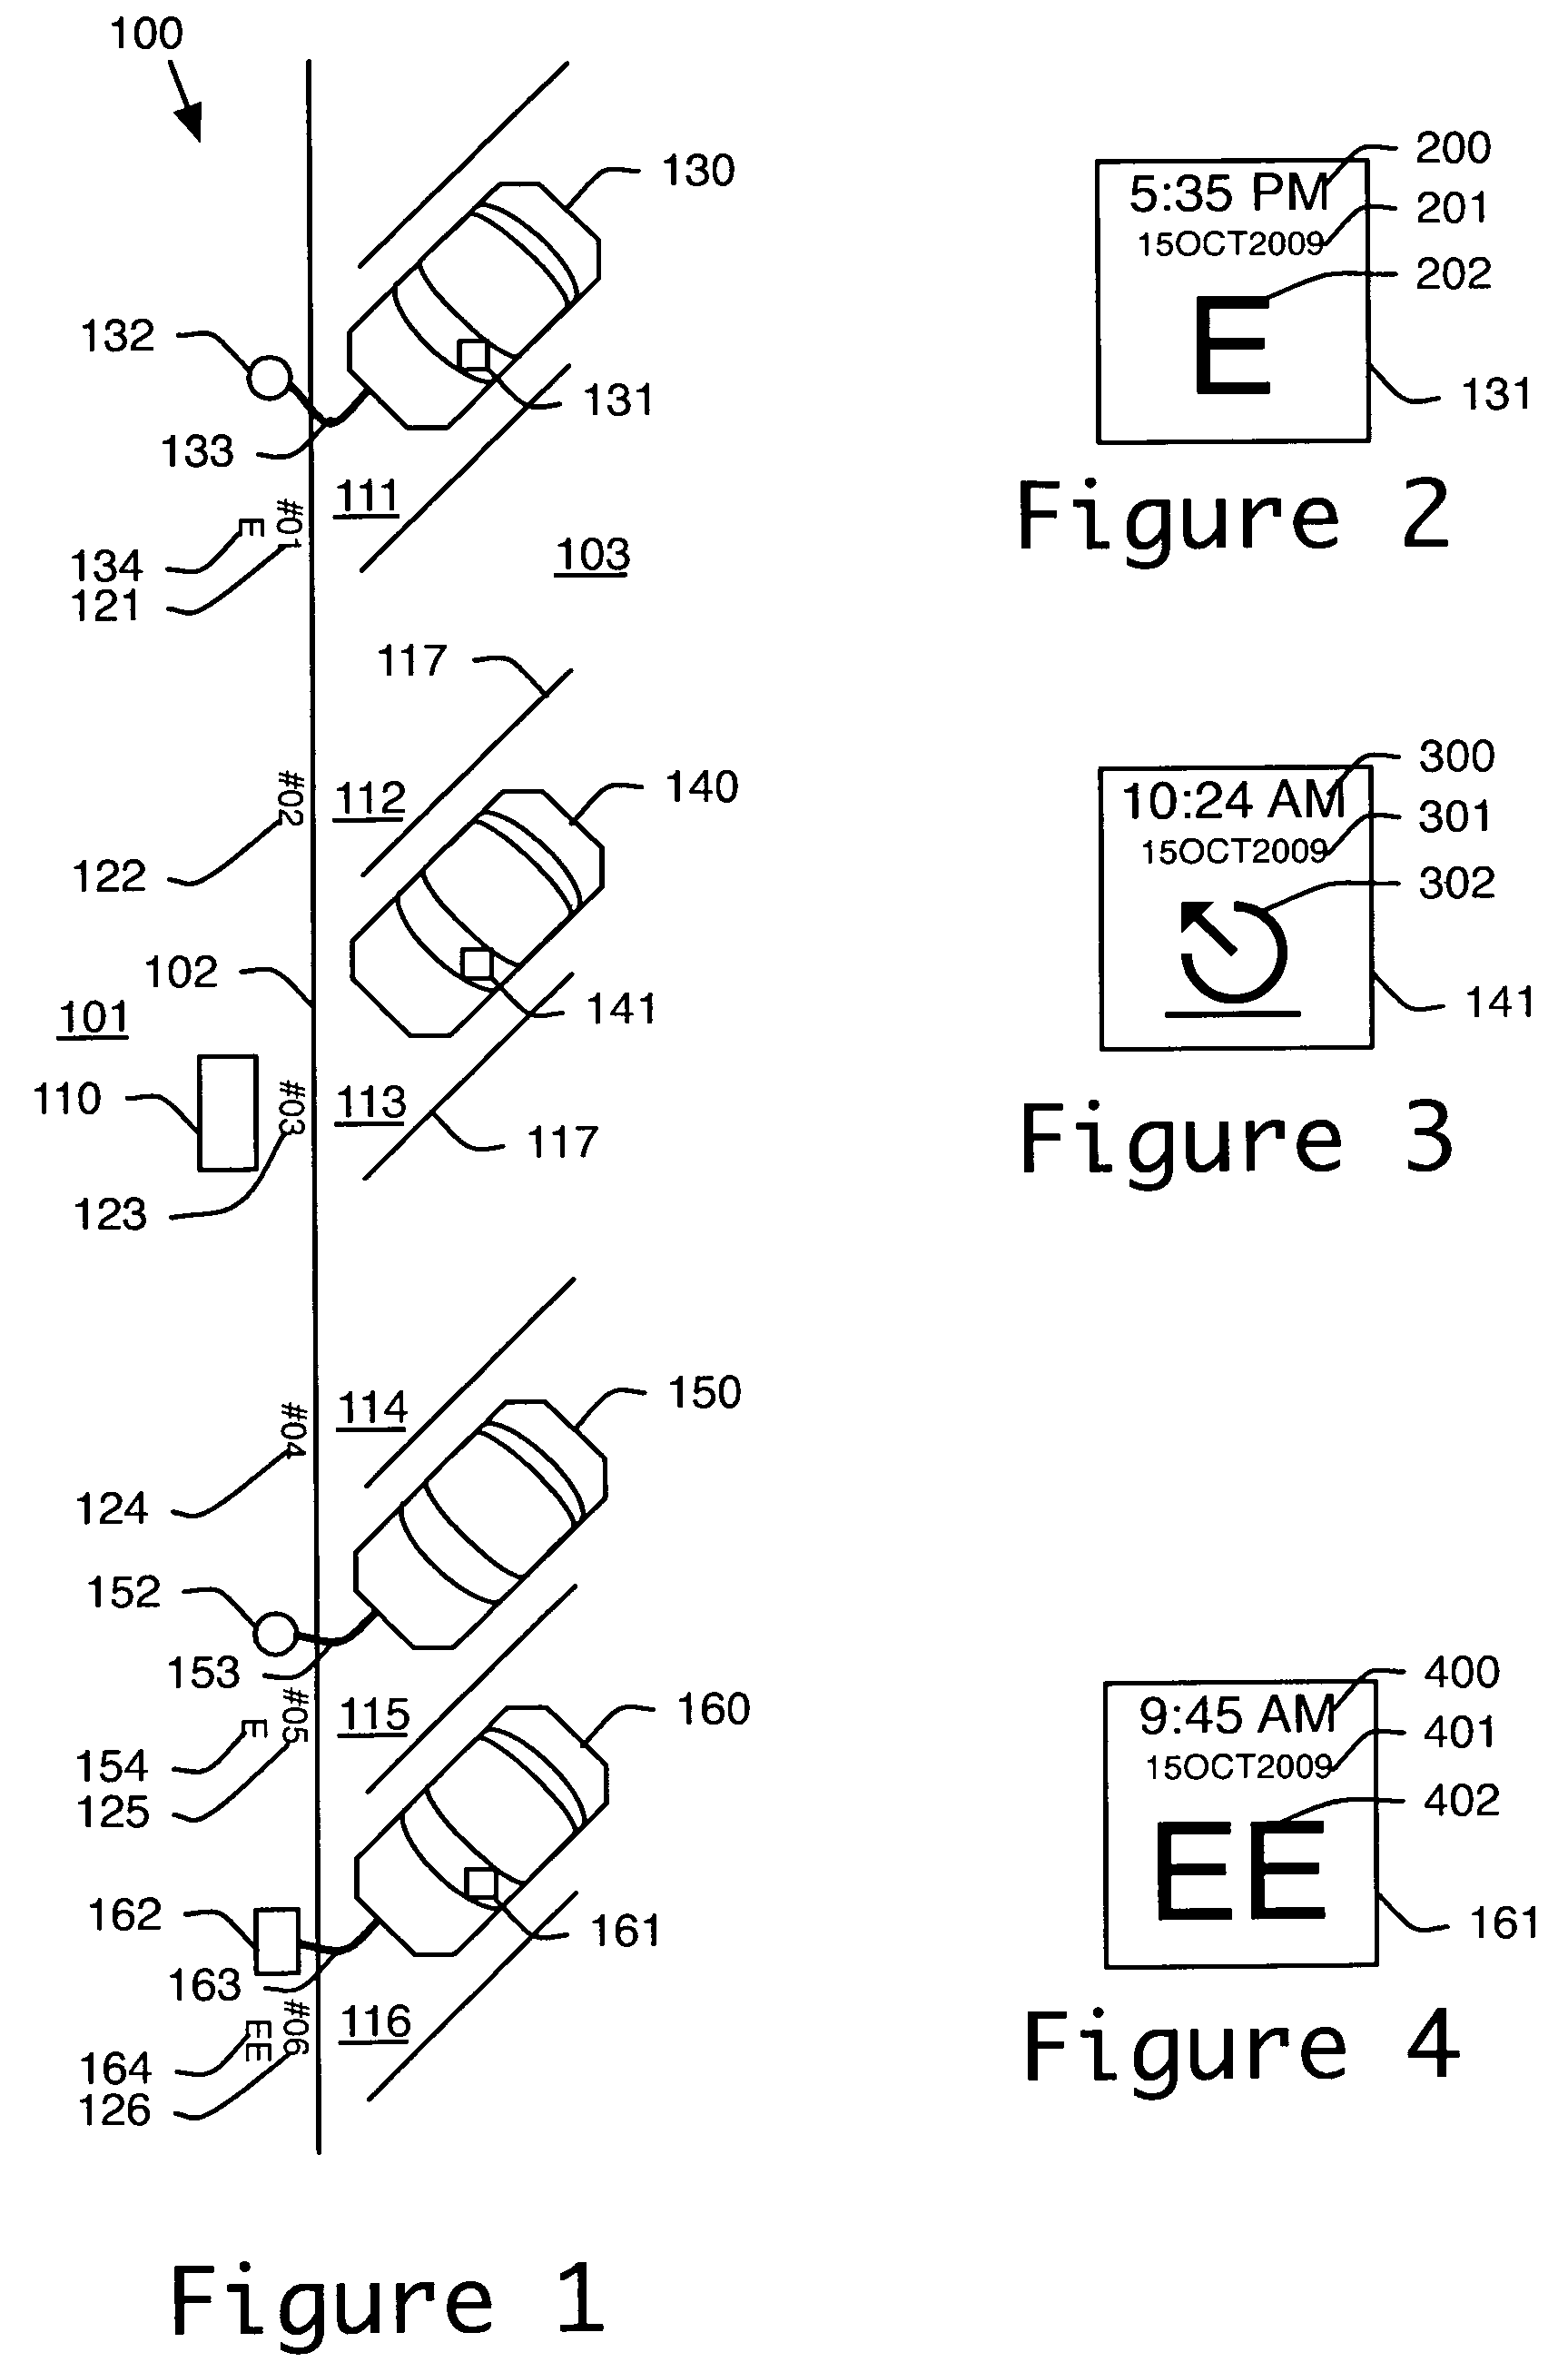 Method and apparatus for parking lot metering